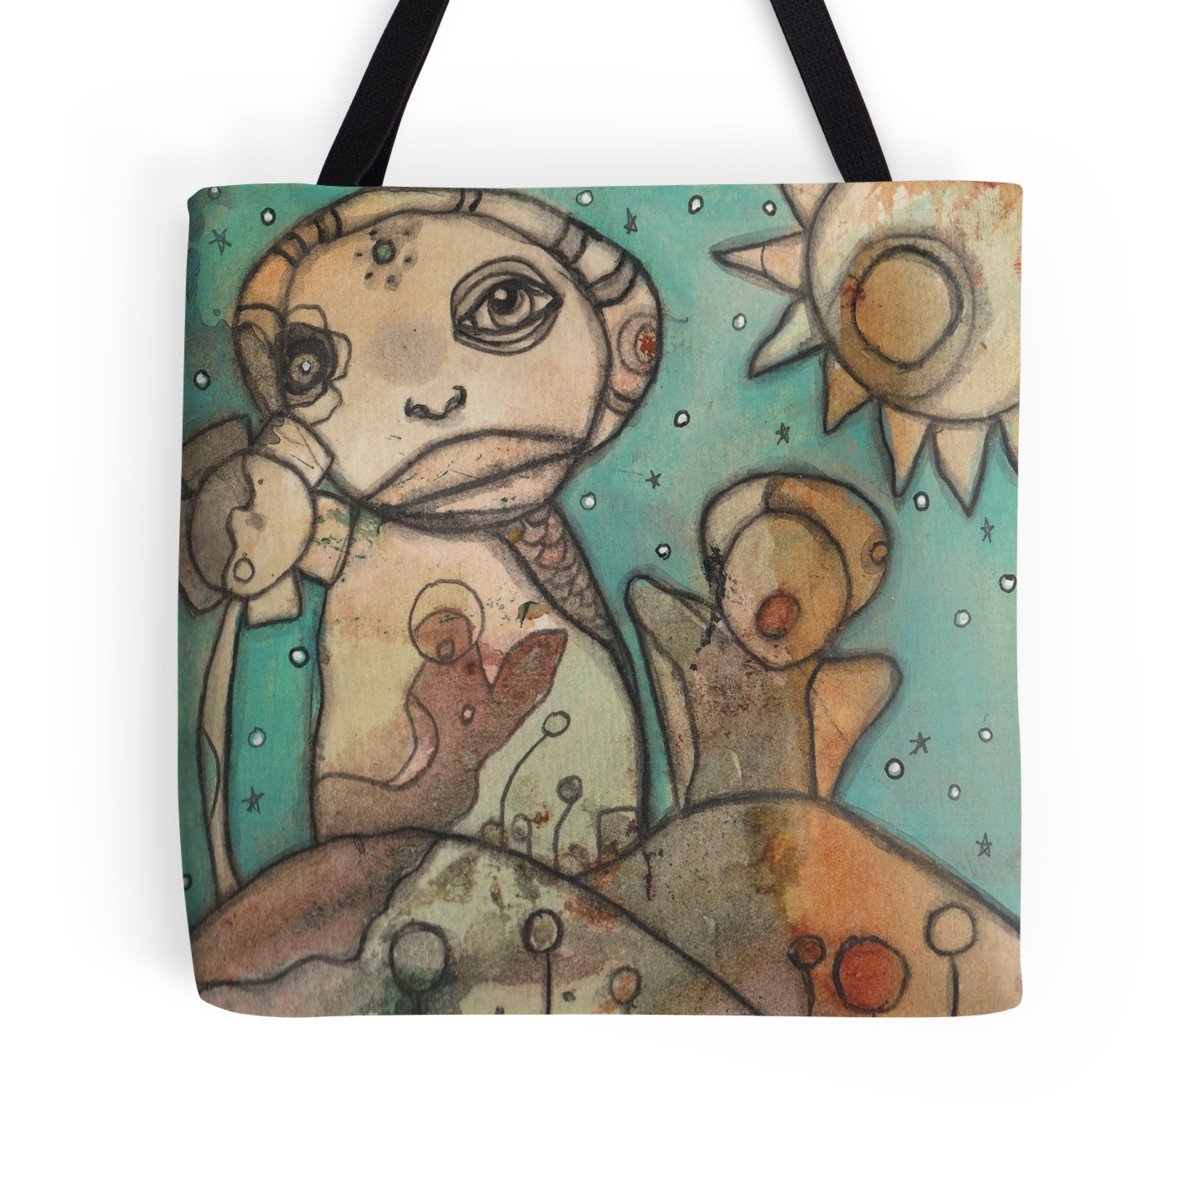 Tote Bag Mixed Media Art 'Garden Party painted by C.Cambrea featured in  Haute Handbags - Castle of Joy